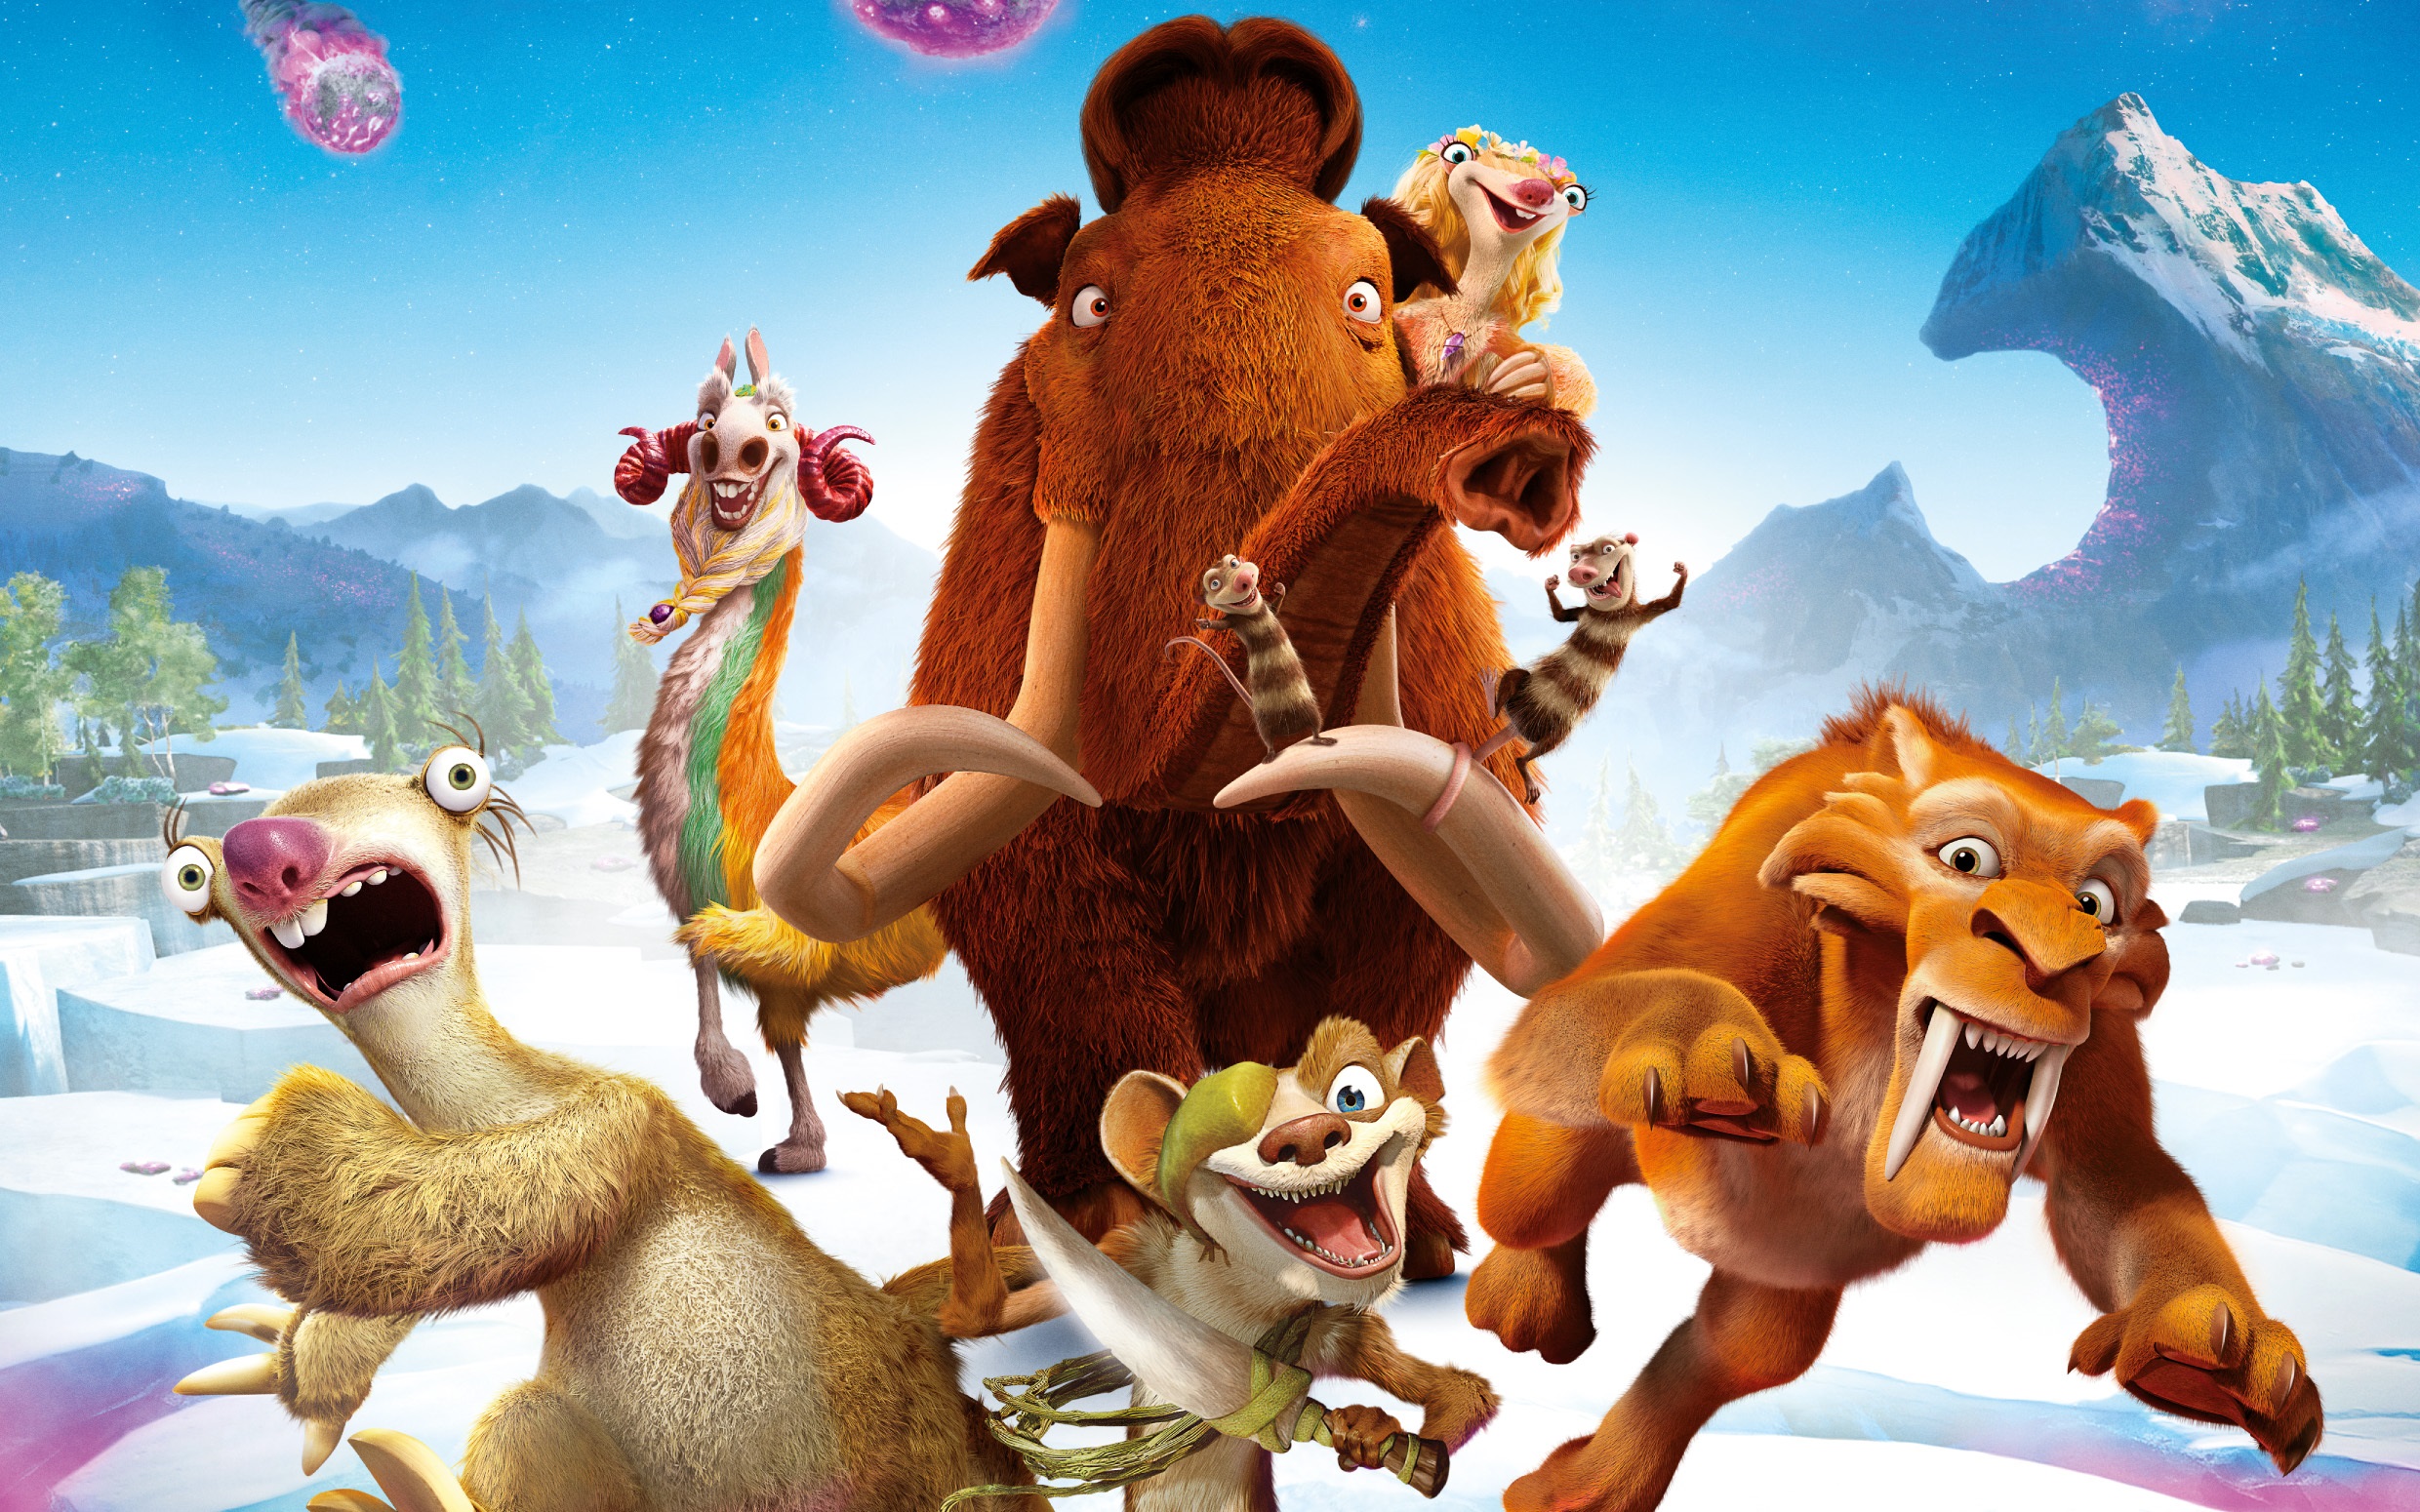 Popular Buck (Ice Age) Image for Phone